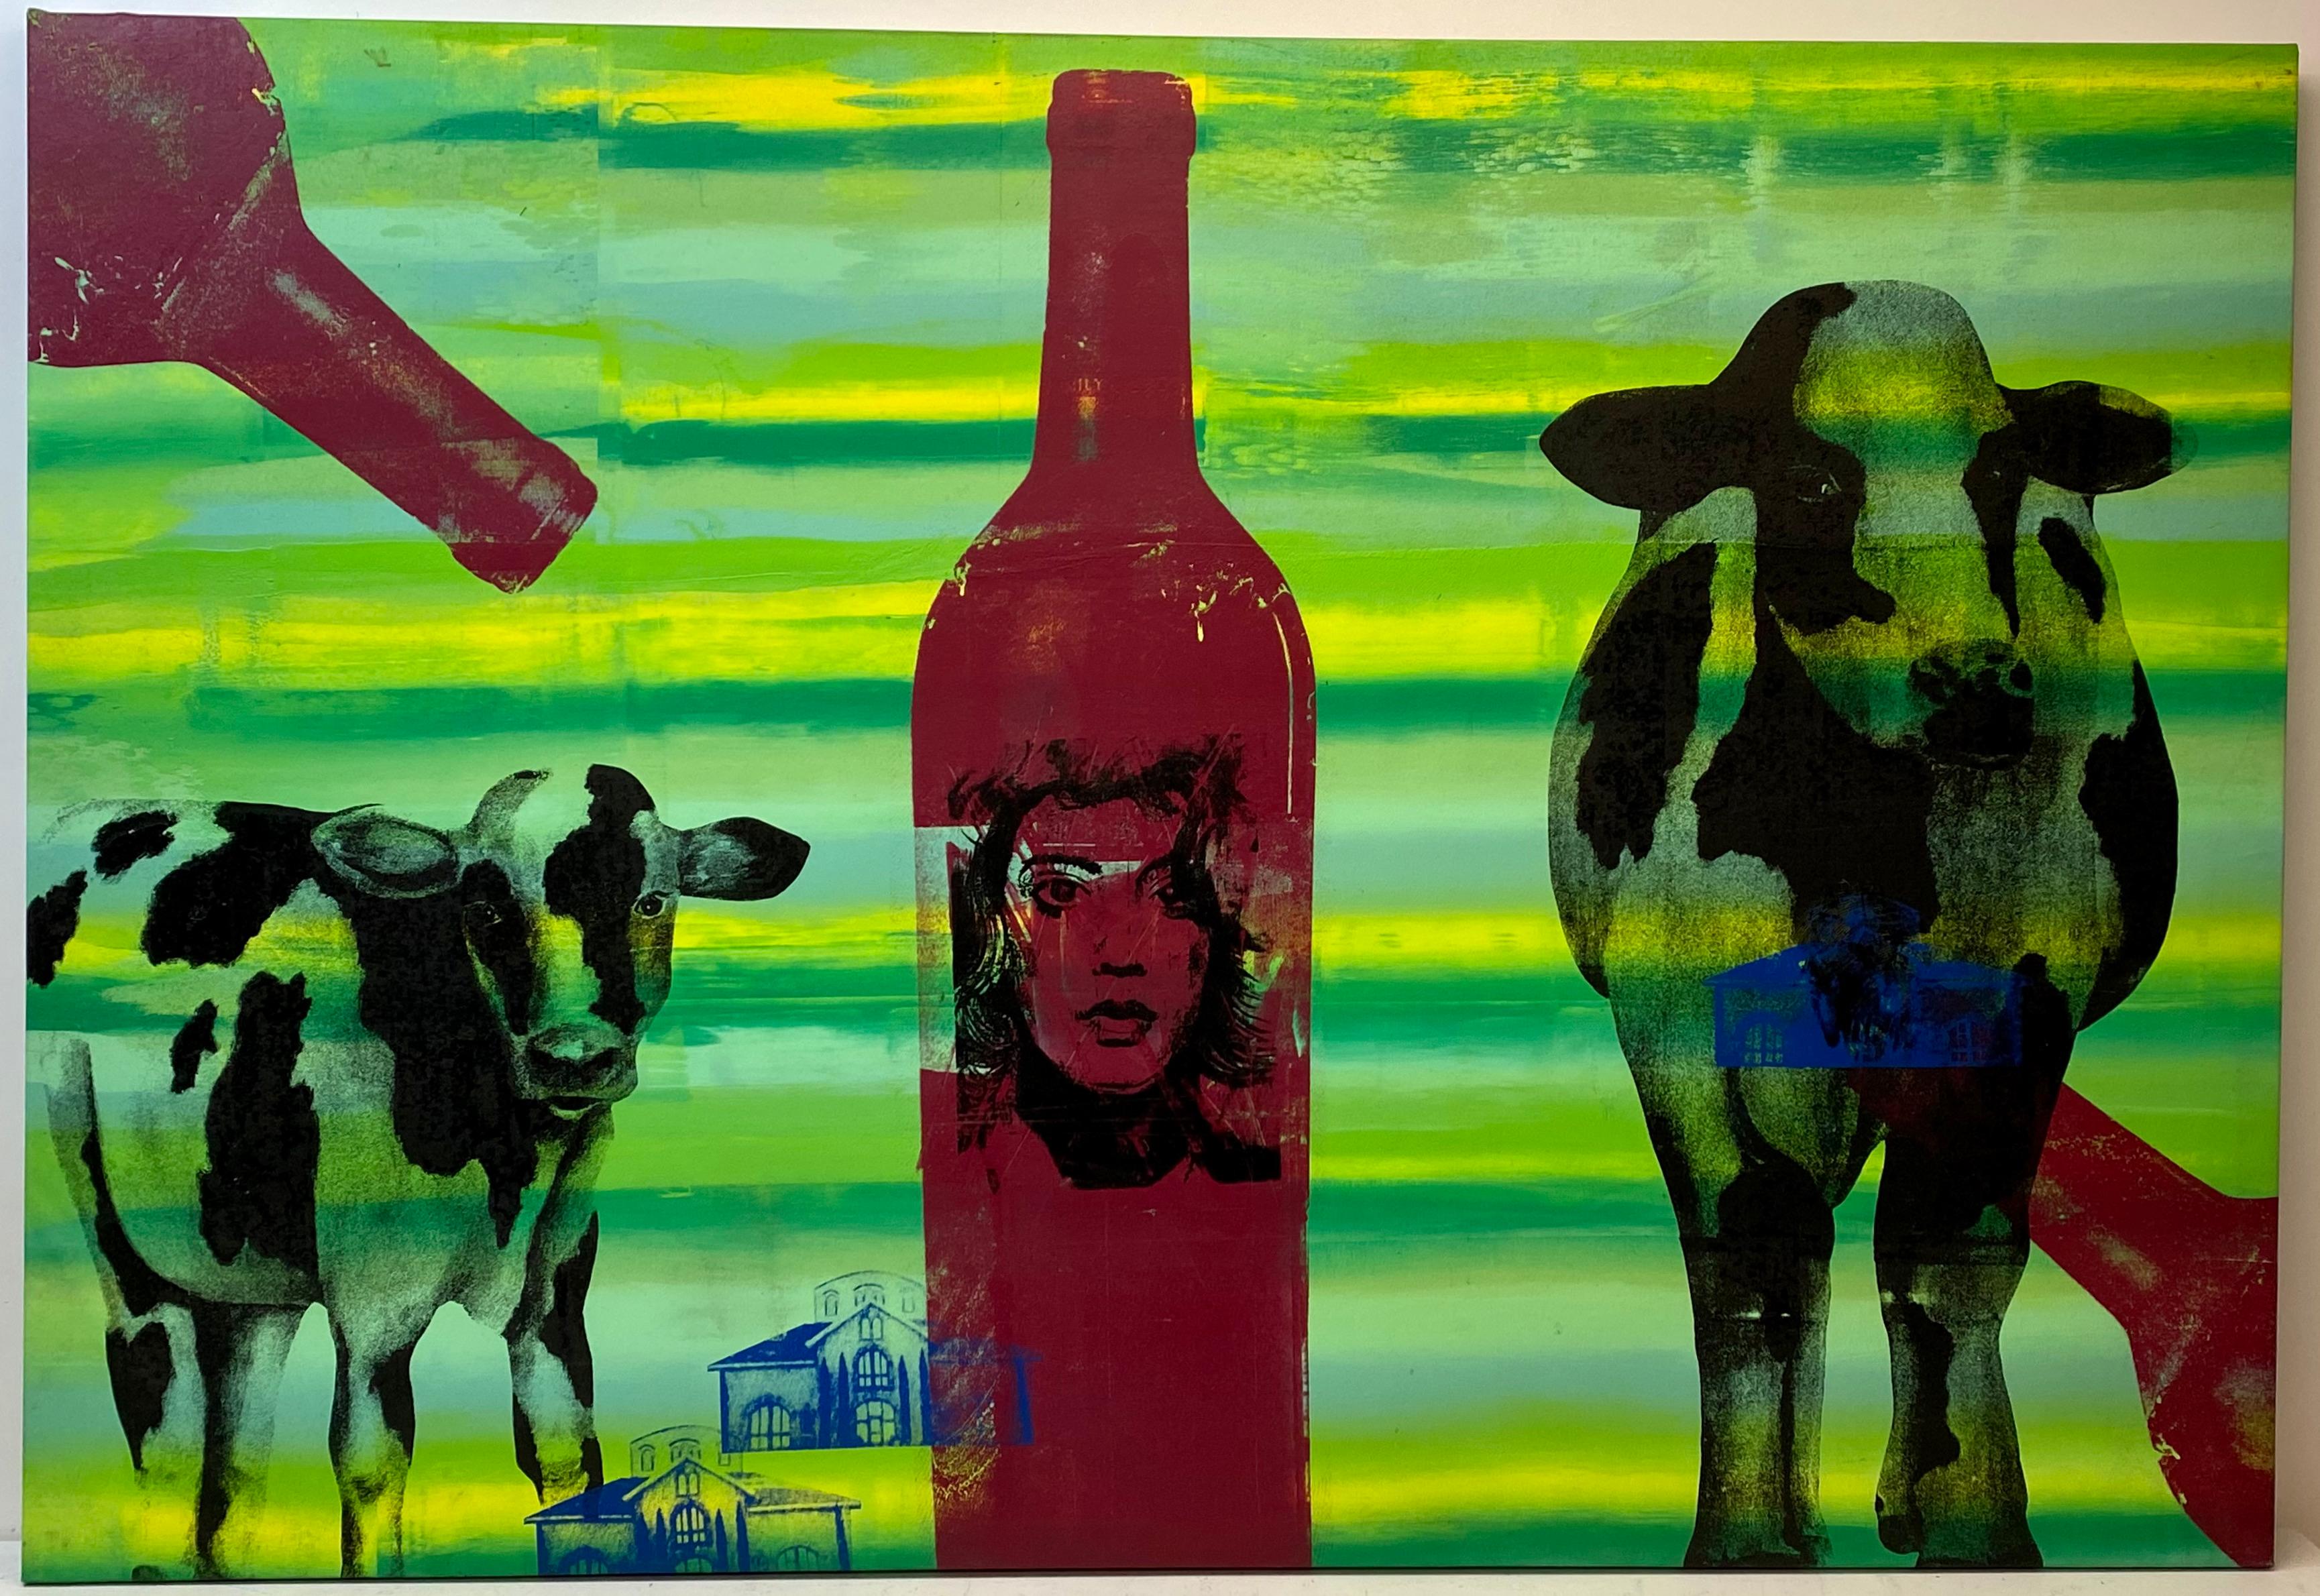 21st Century Large Scale Pop Art Painting on Canvas With Cows